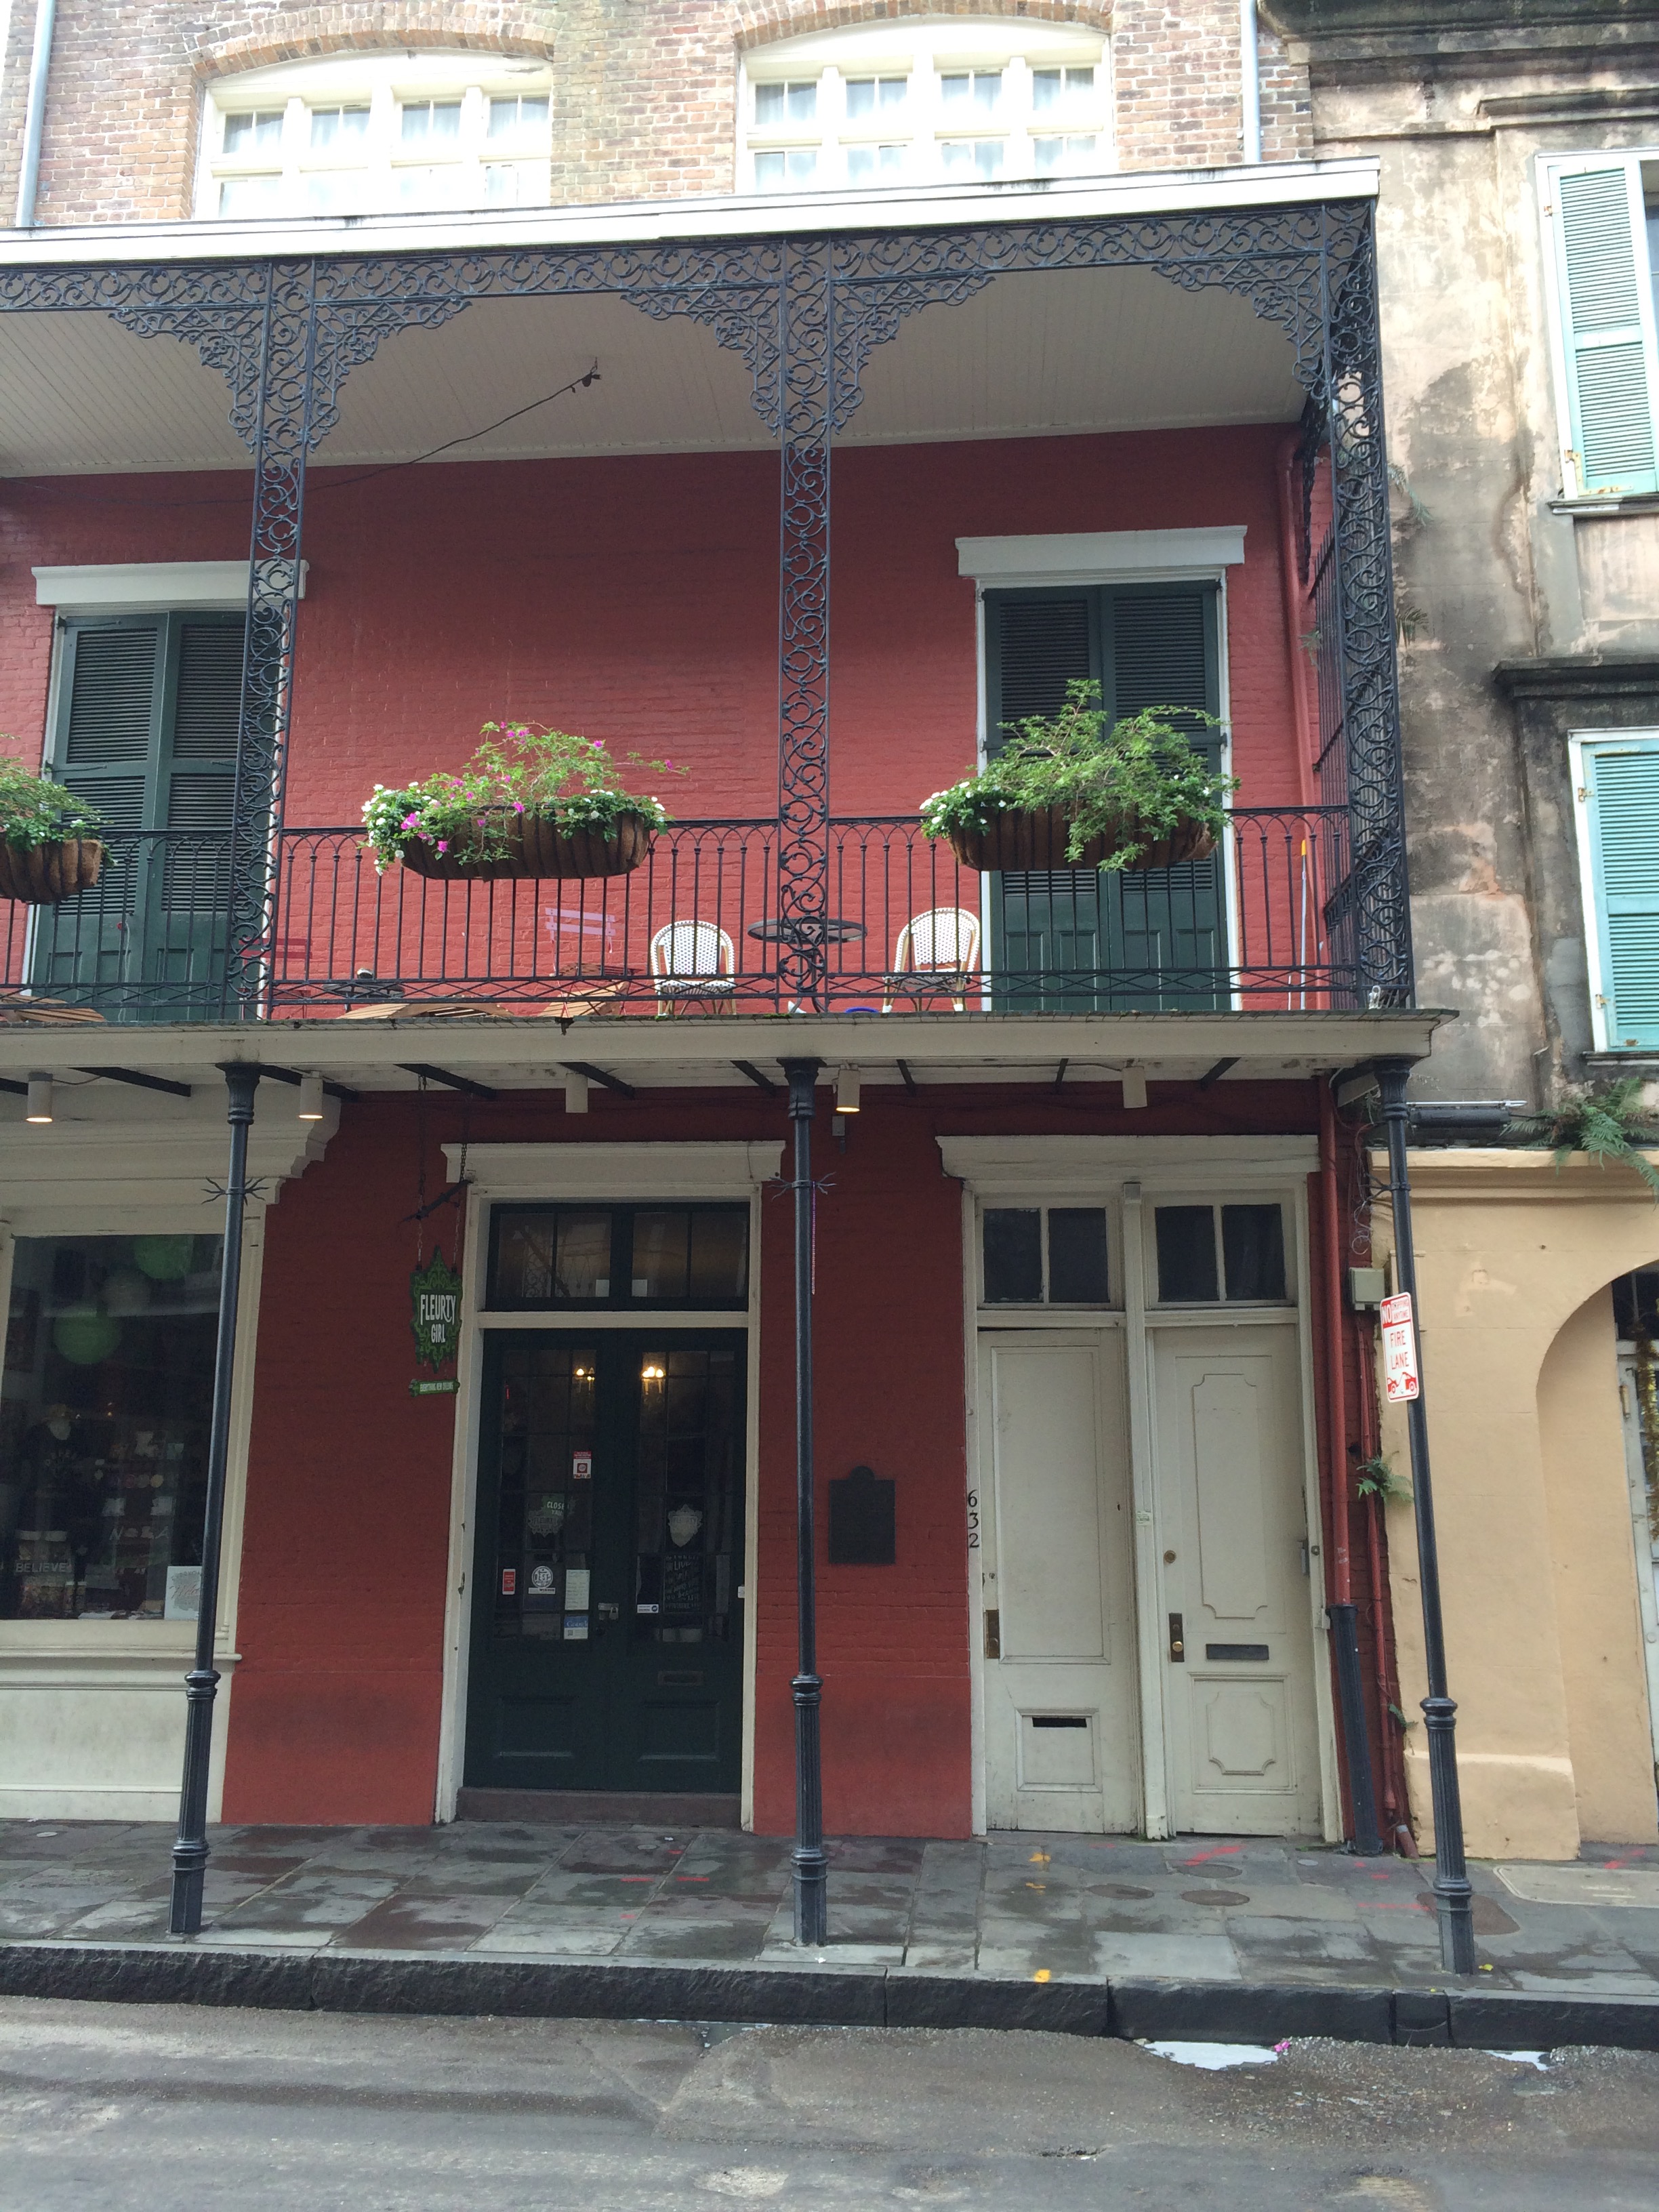 Tennessee williams streetcar house